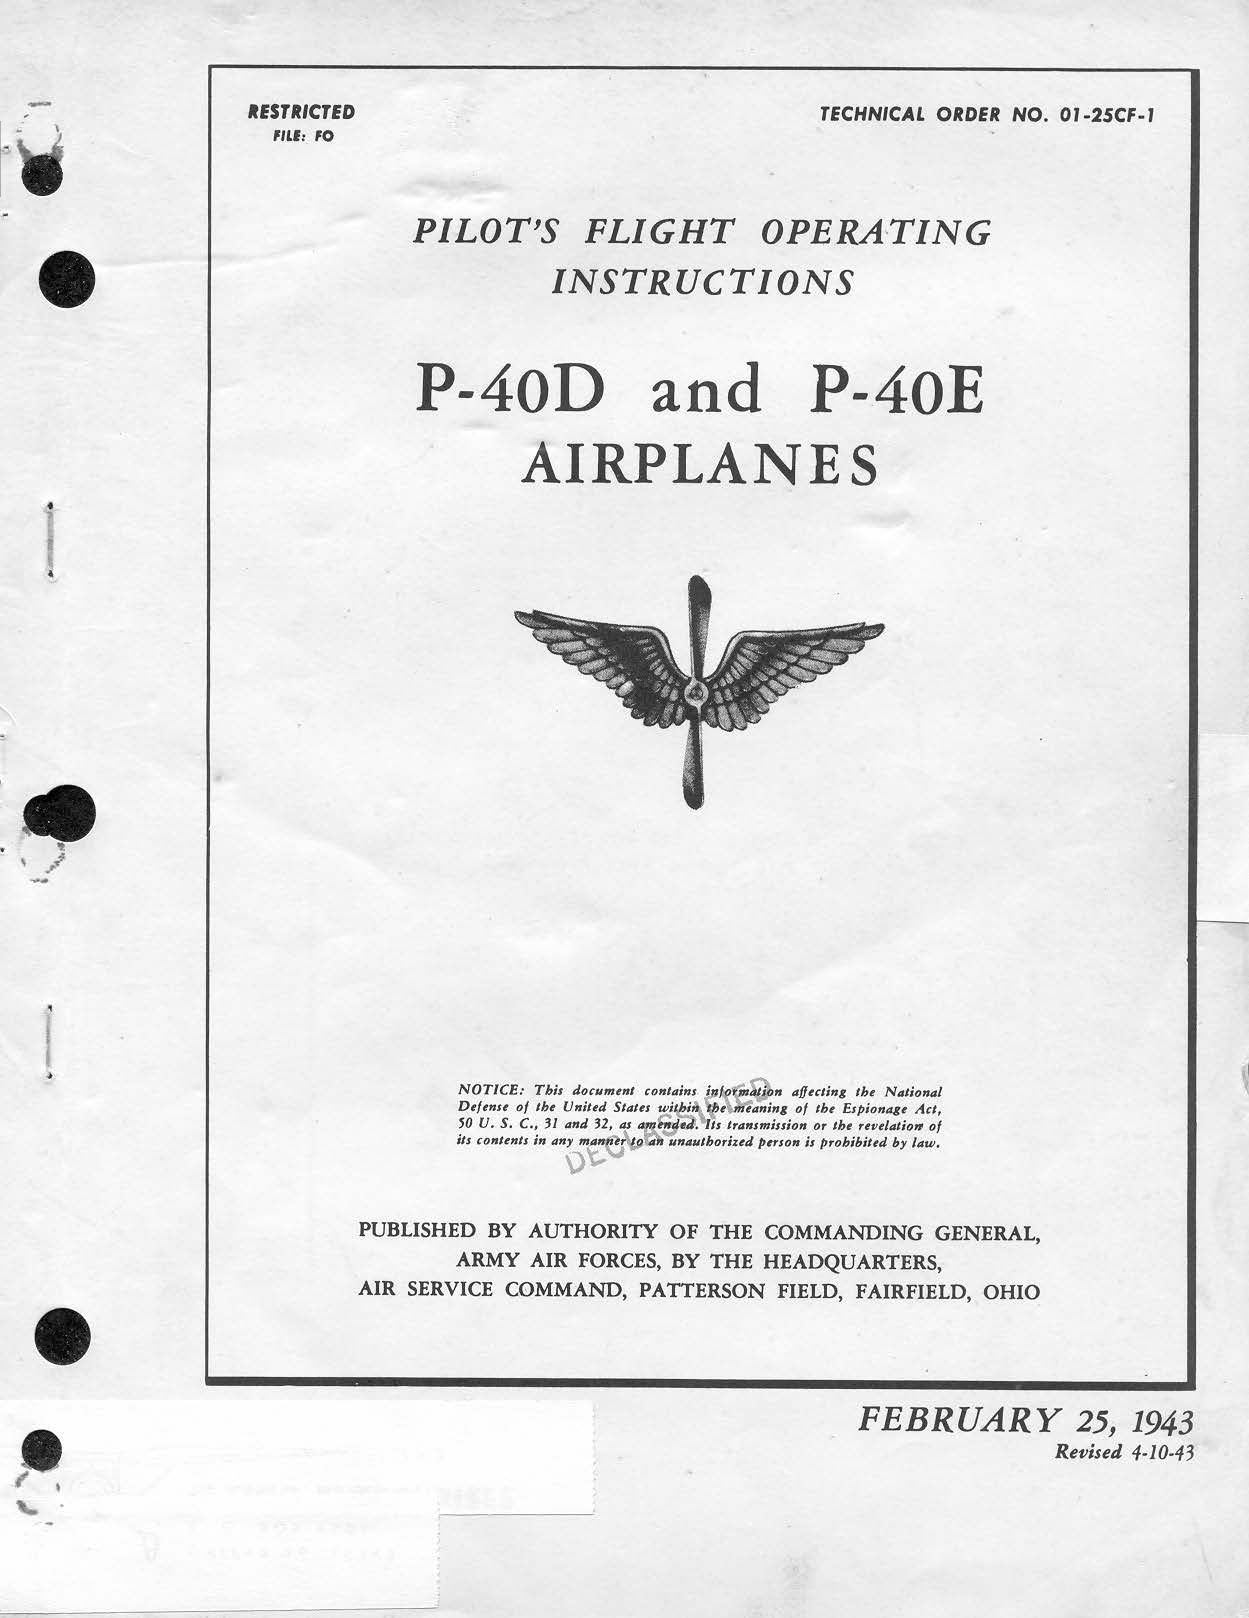 Sample page 1 from AirCorps Library document: Pilot's Flight Operating Instructions for P-40D and P-40E